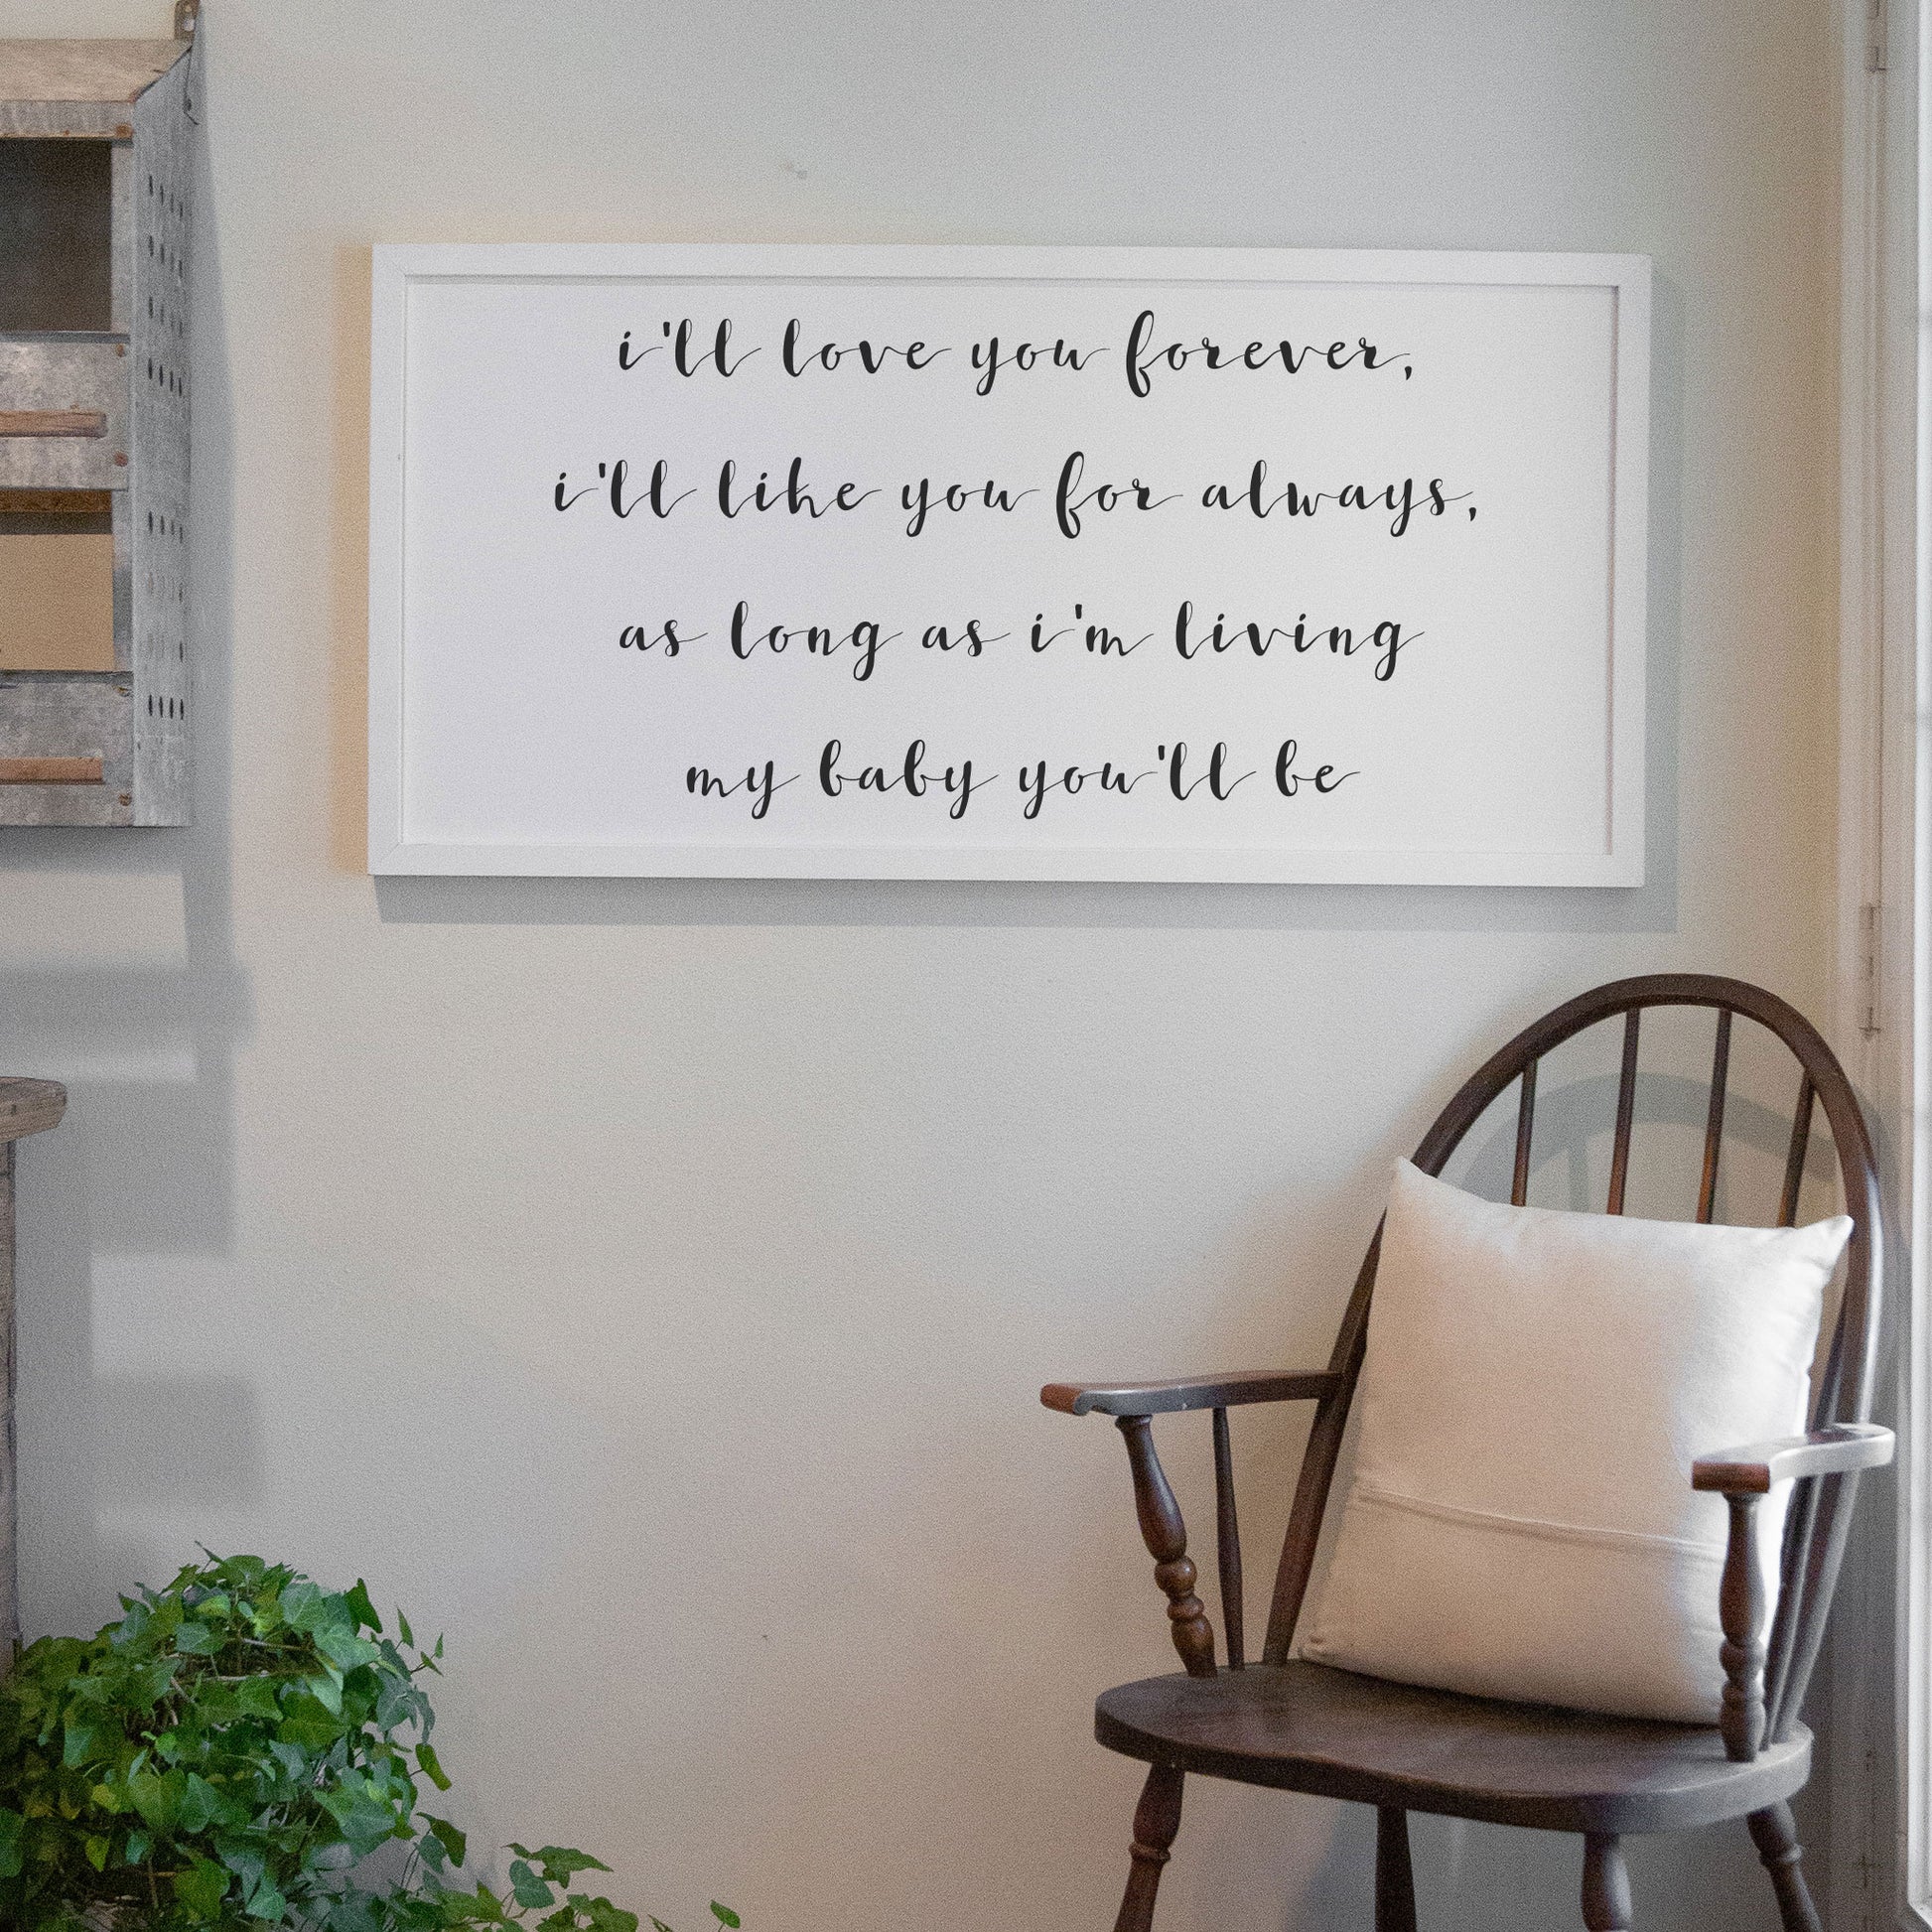 Smallwoods My Baby You'll Be Quote Sign White